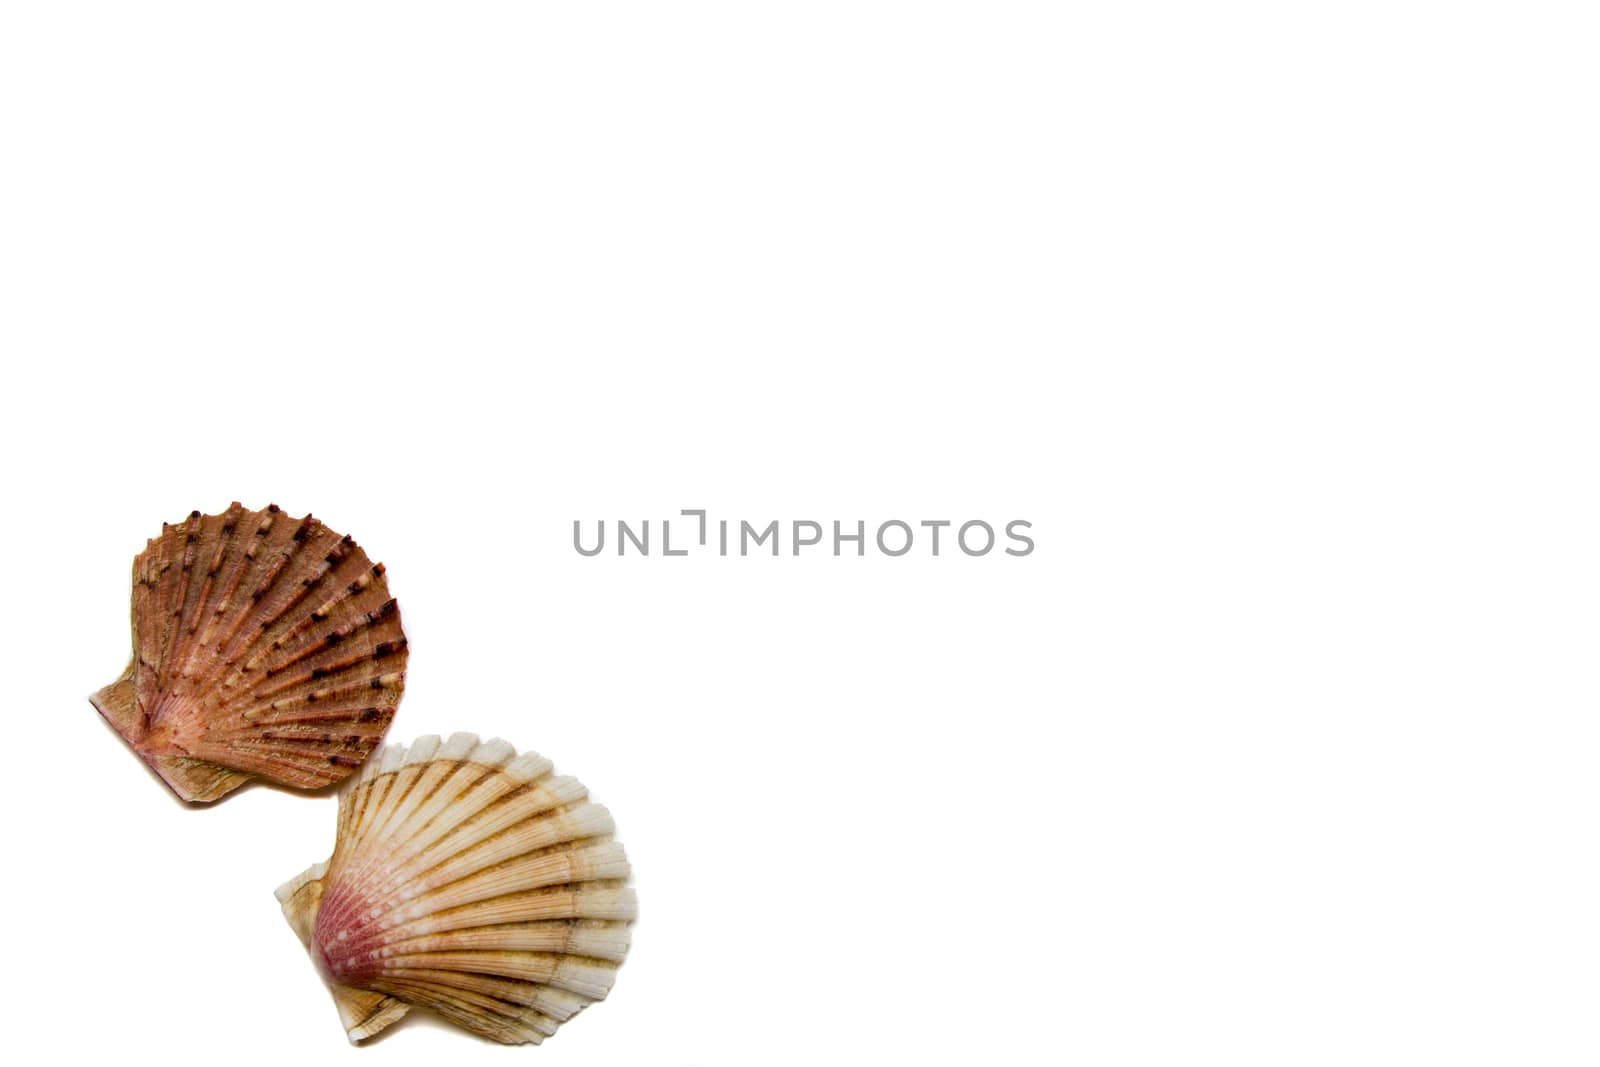 shells on a white background by smoxx